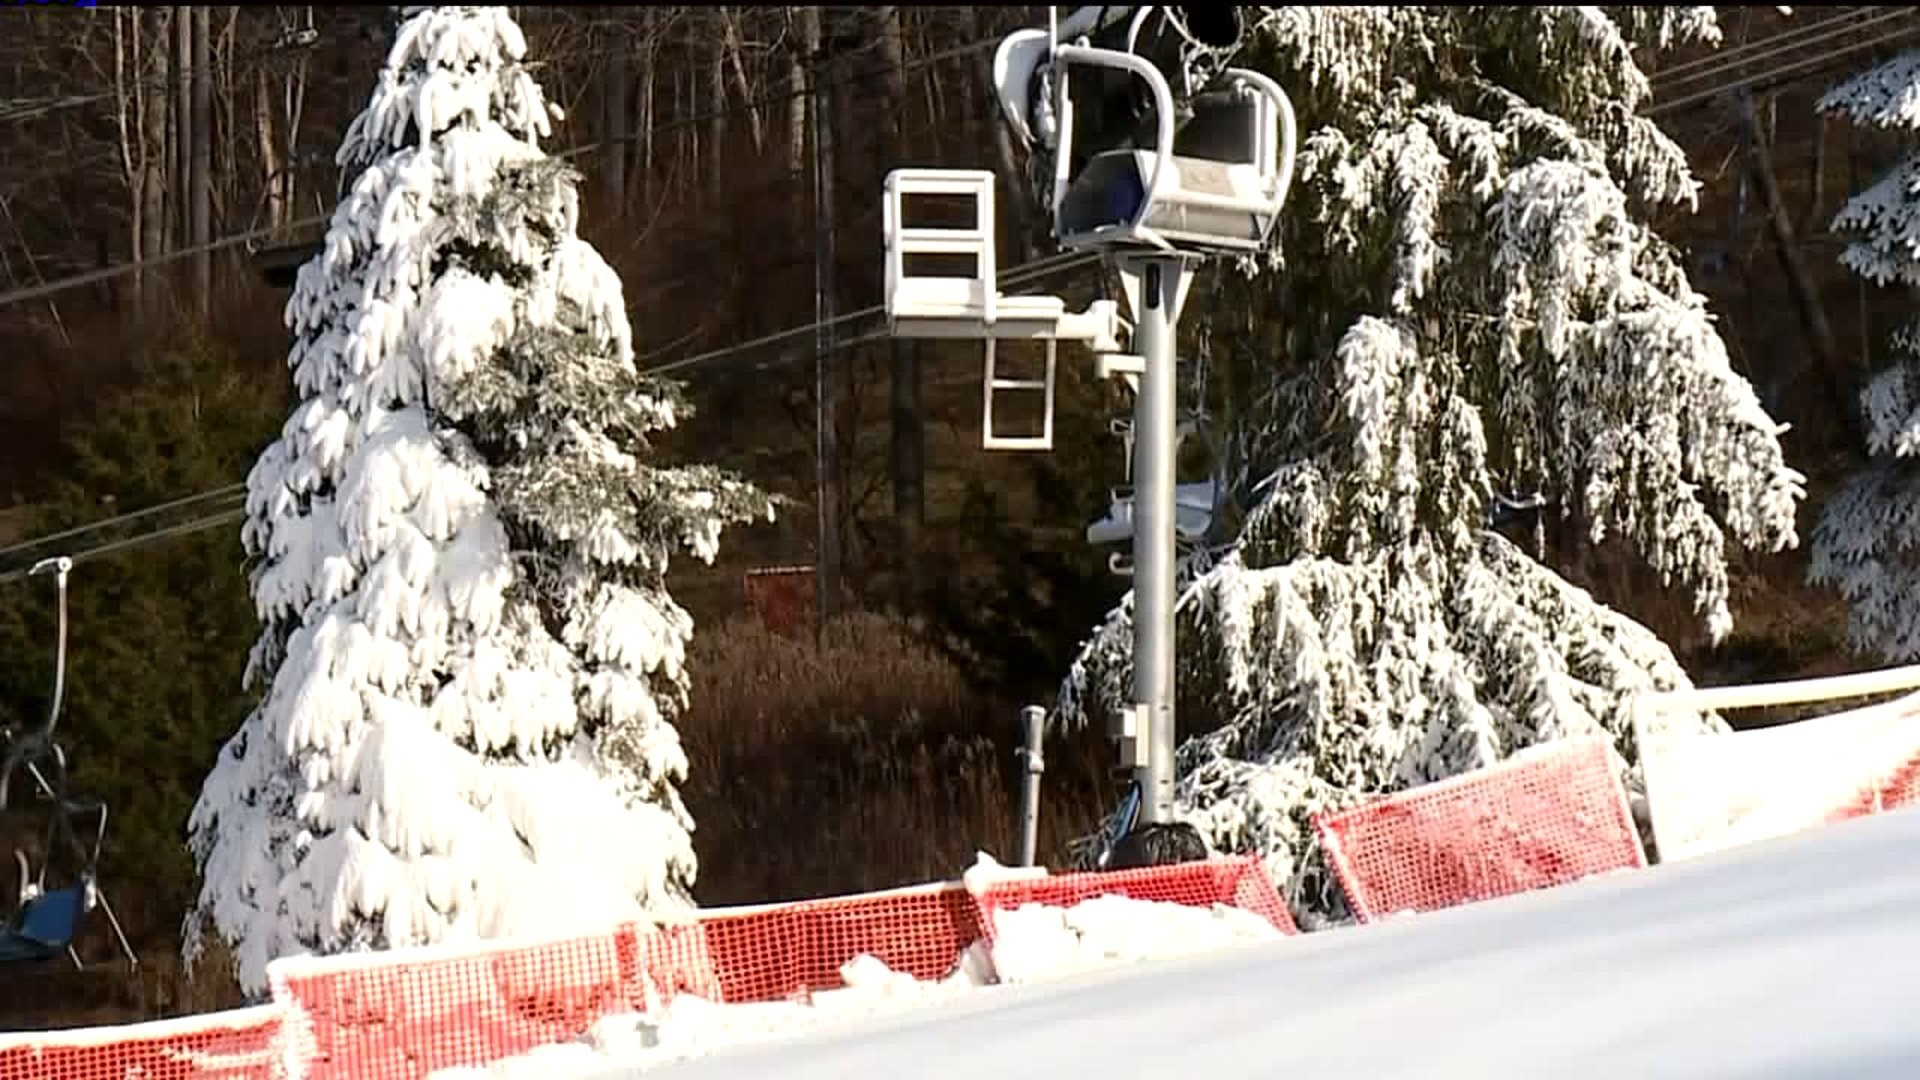 Ski Resorts Welcome Cold Temperatures to Make Snow